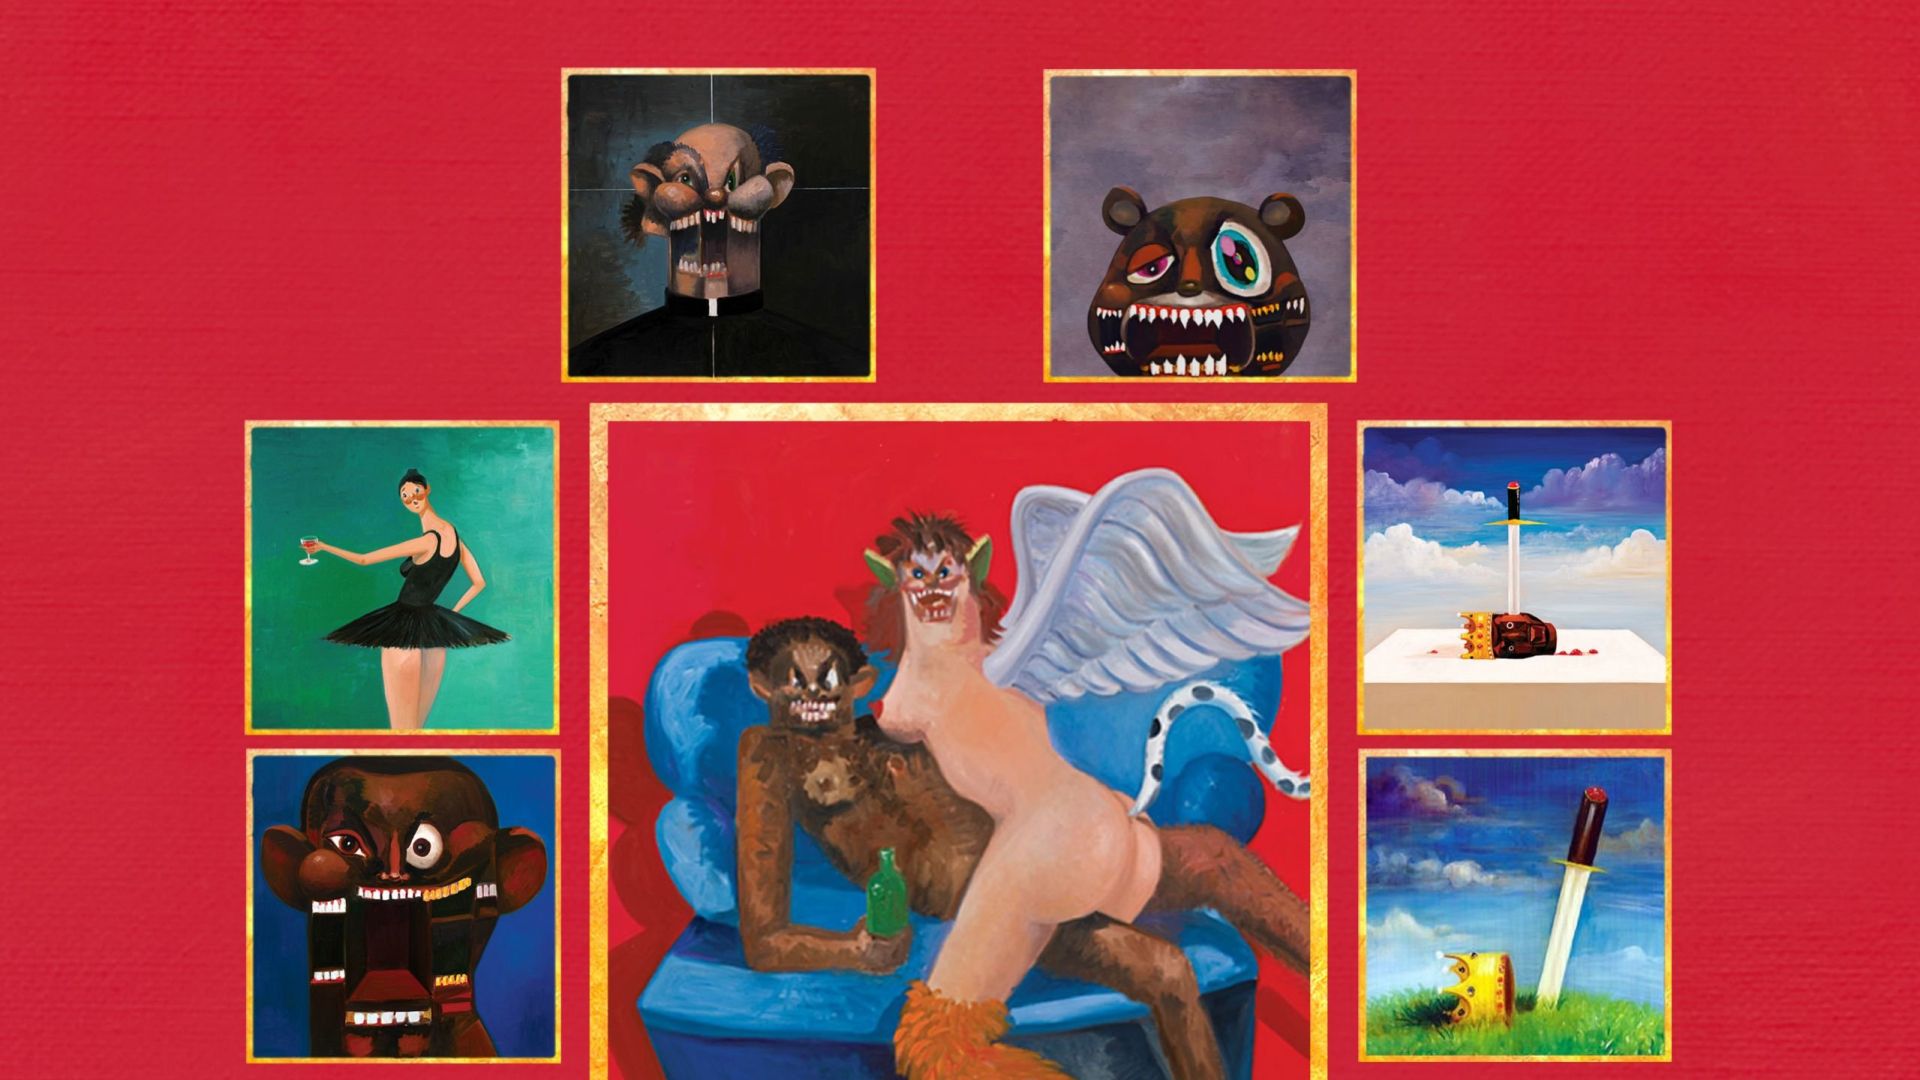 Made a my beautiful dark twisted fantasy wall for a friend wallpaper in x resolution